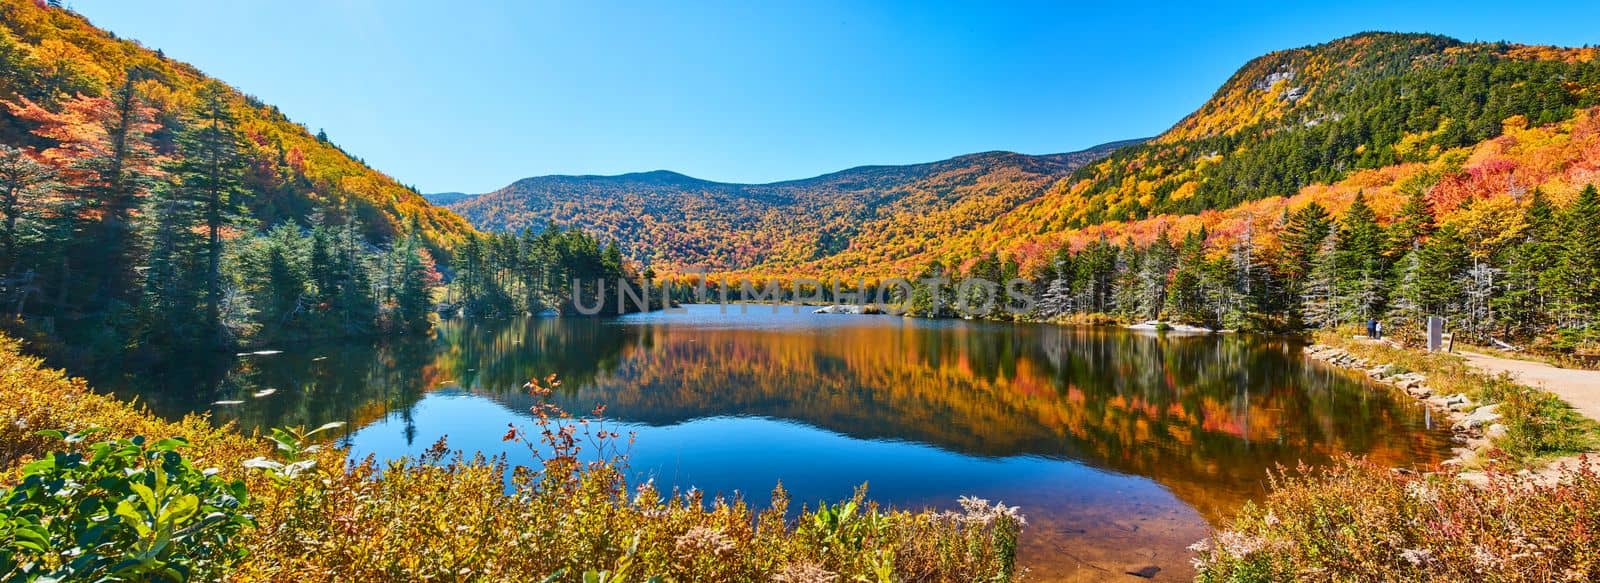 Beautiful panorama of blue lake in New Hampshire mountains during peak fall foliage by njproductions